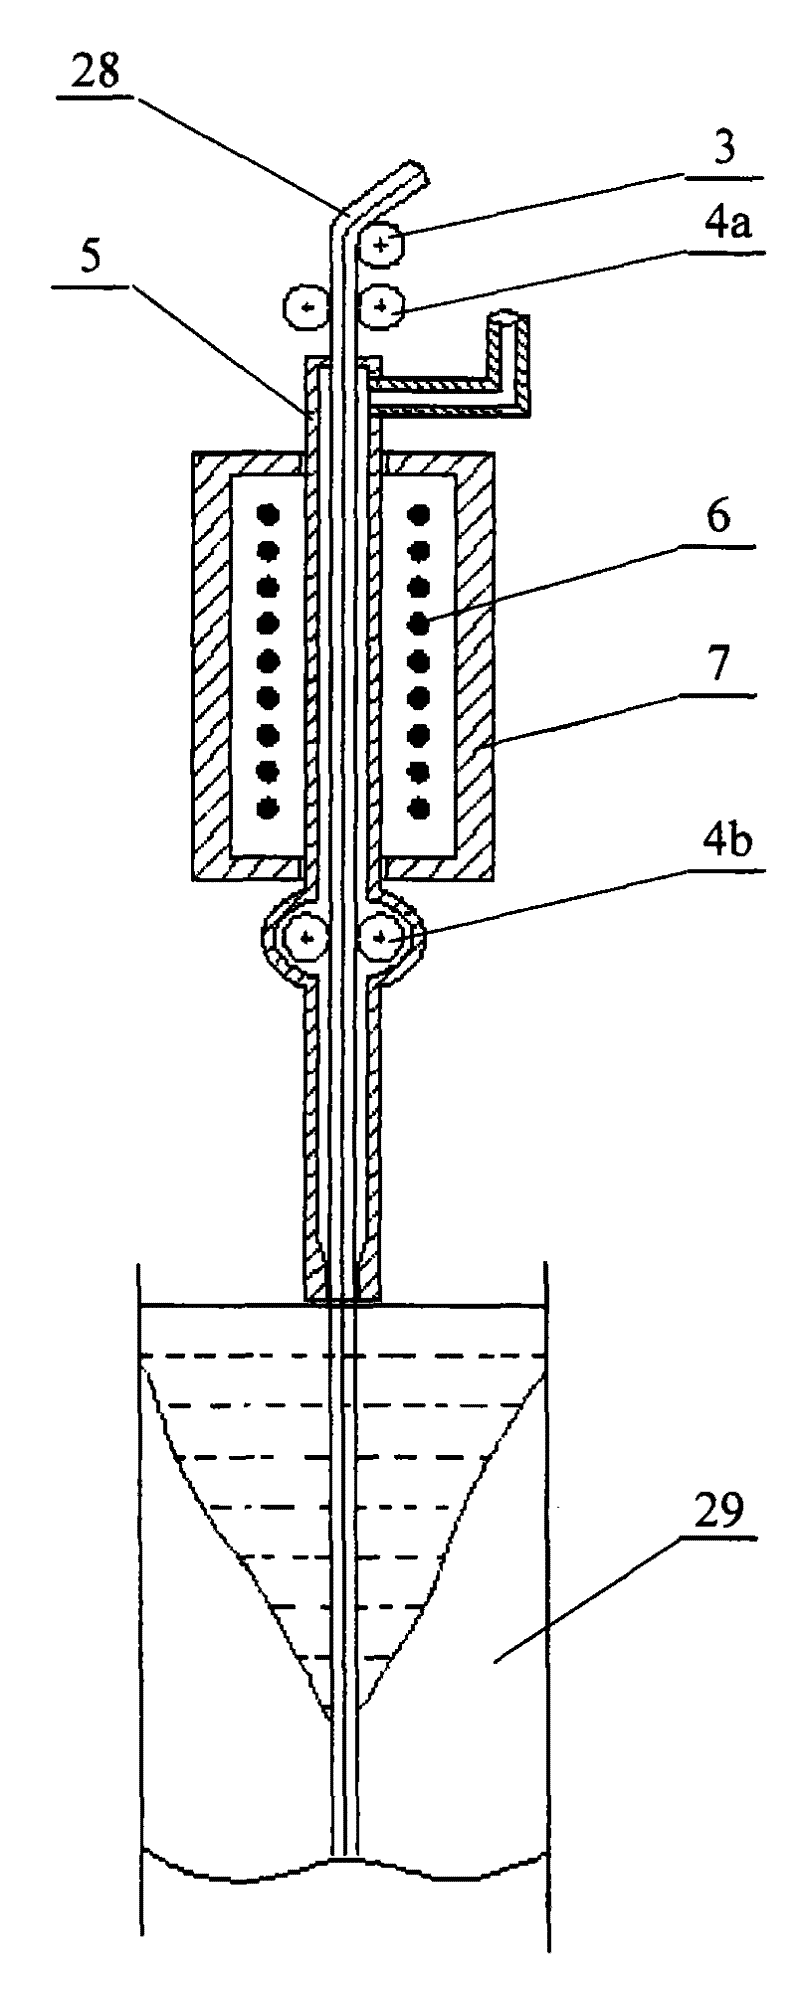 Solid-liquid phase continuous compounding device for stainless steel compound plate slabs